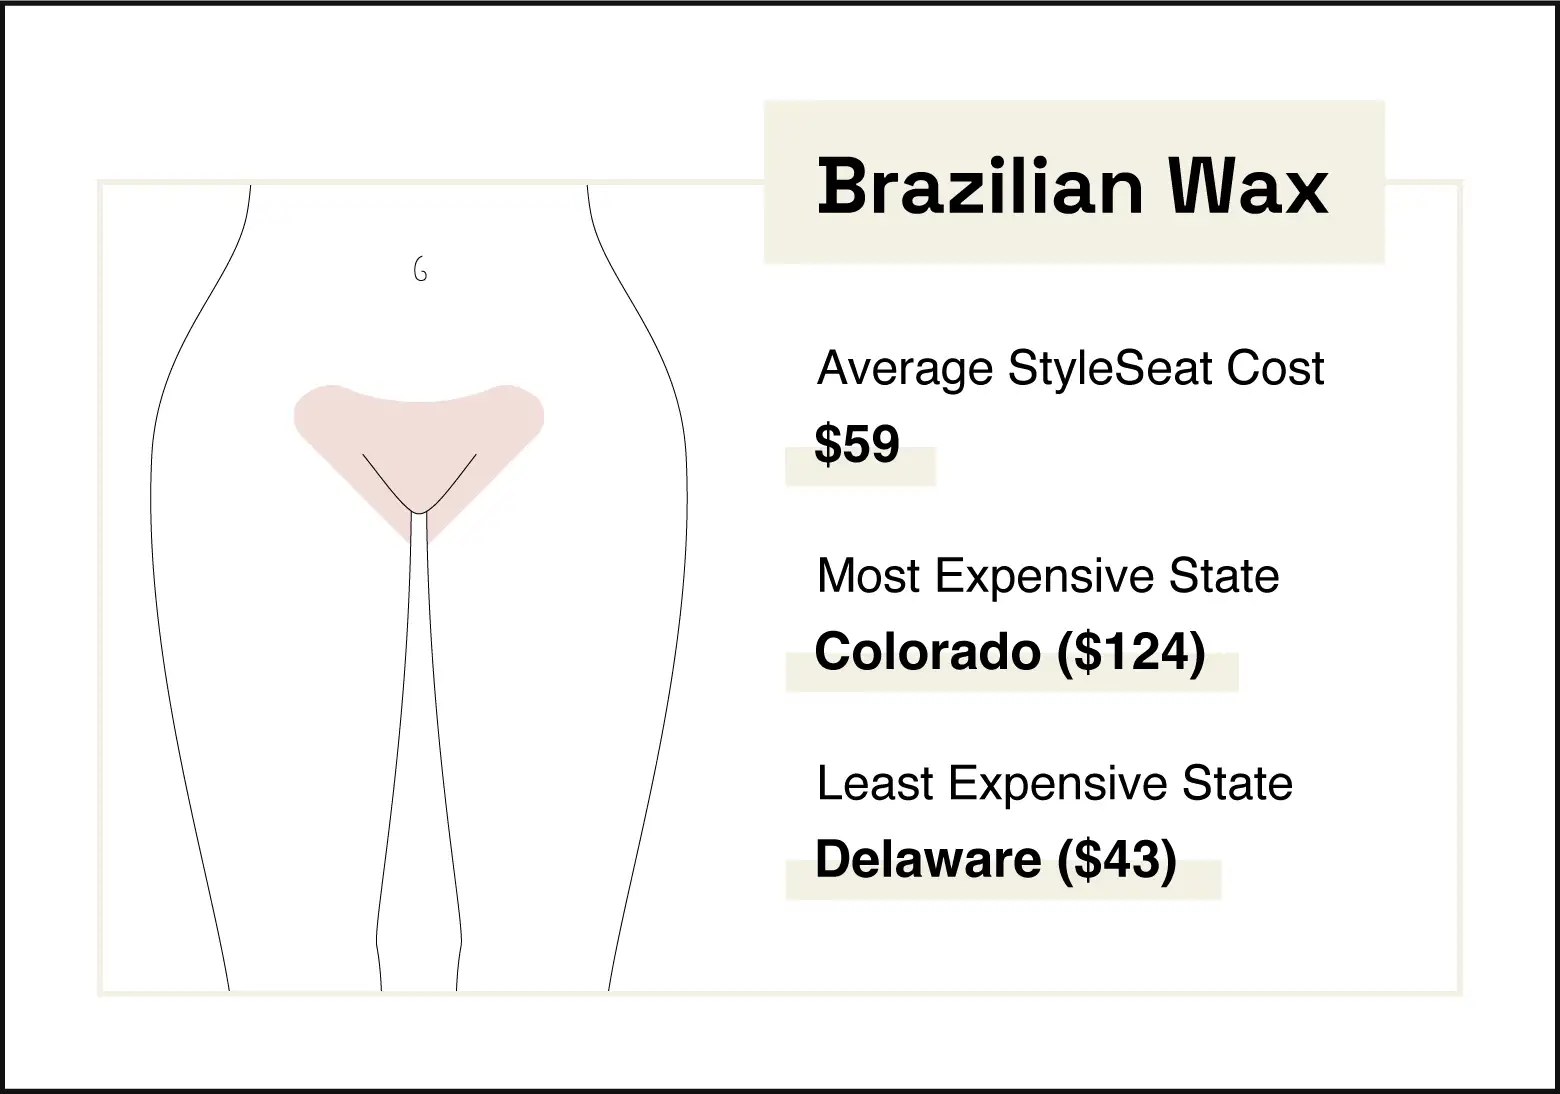 Image shows area where a Brazilian wax occurs. The average Brazilian wax on StyleSeat costs $59.